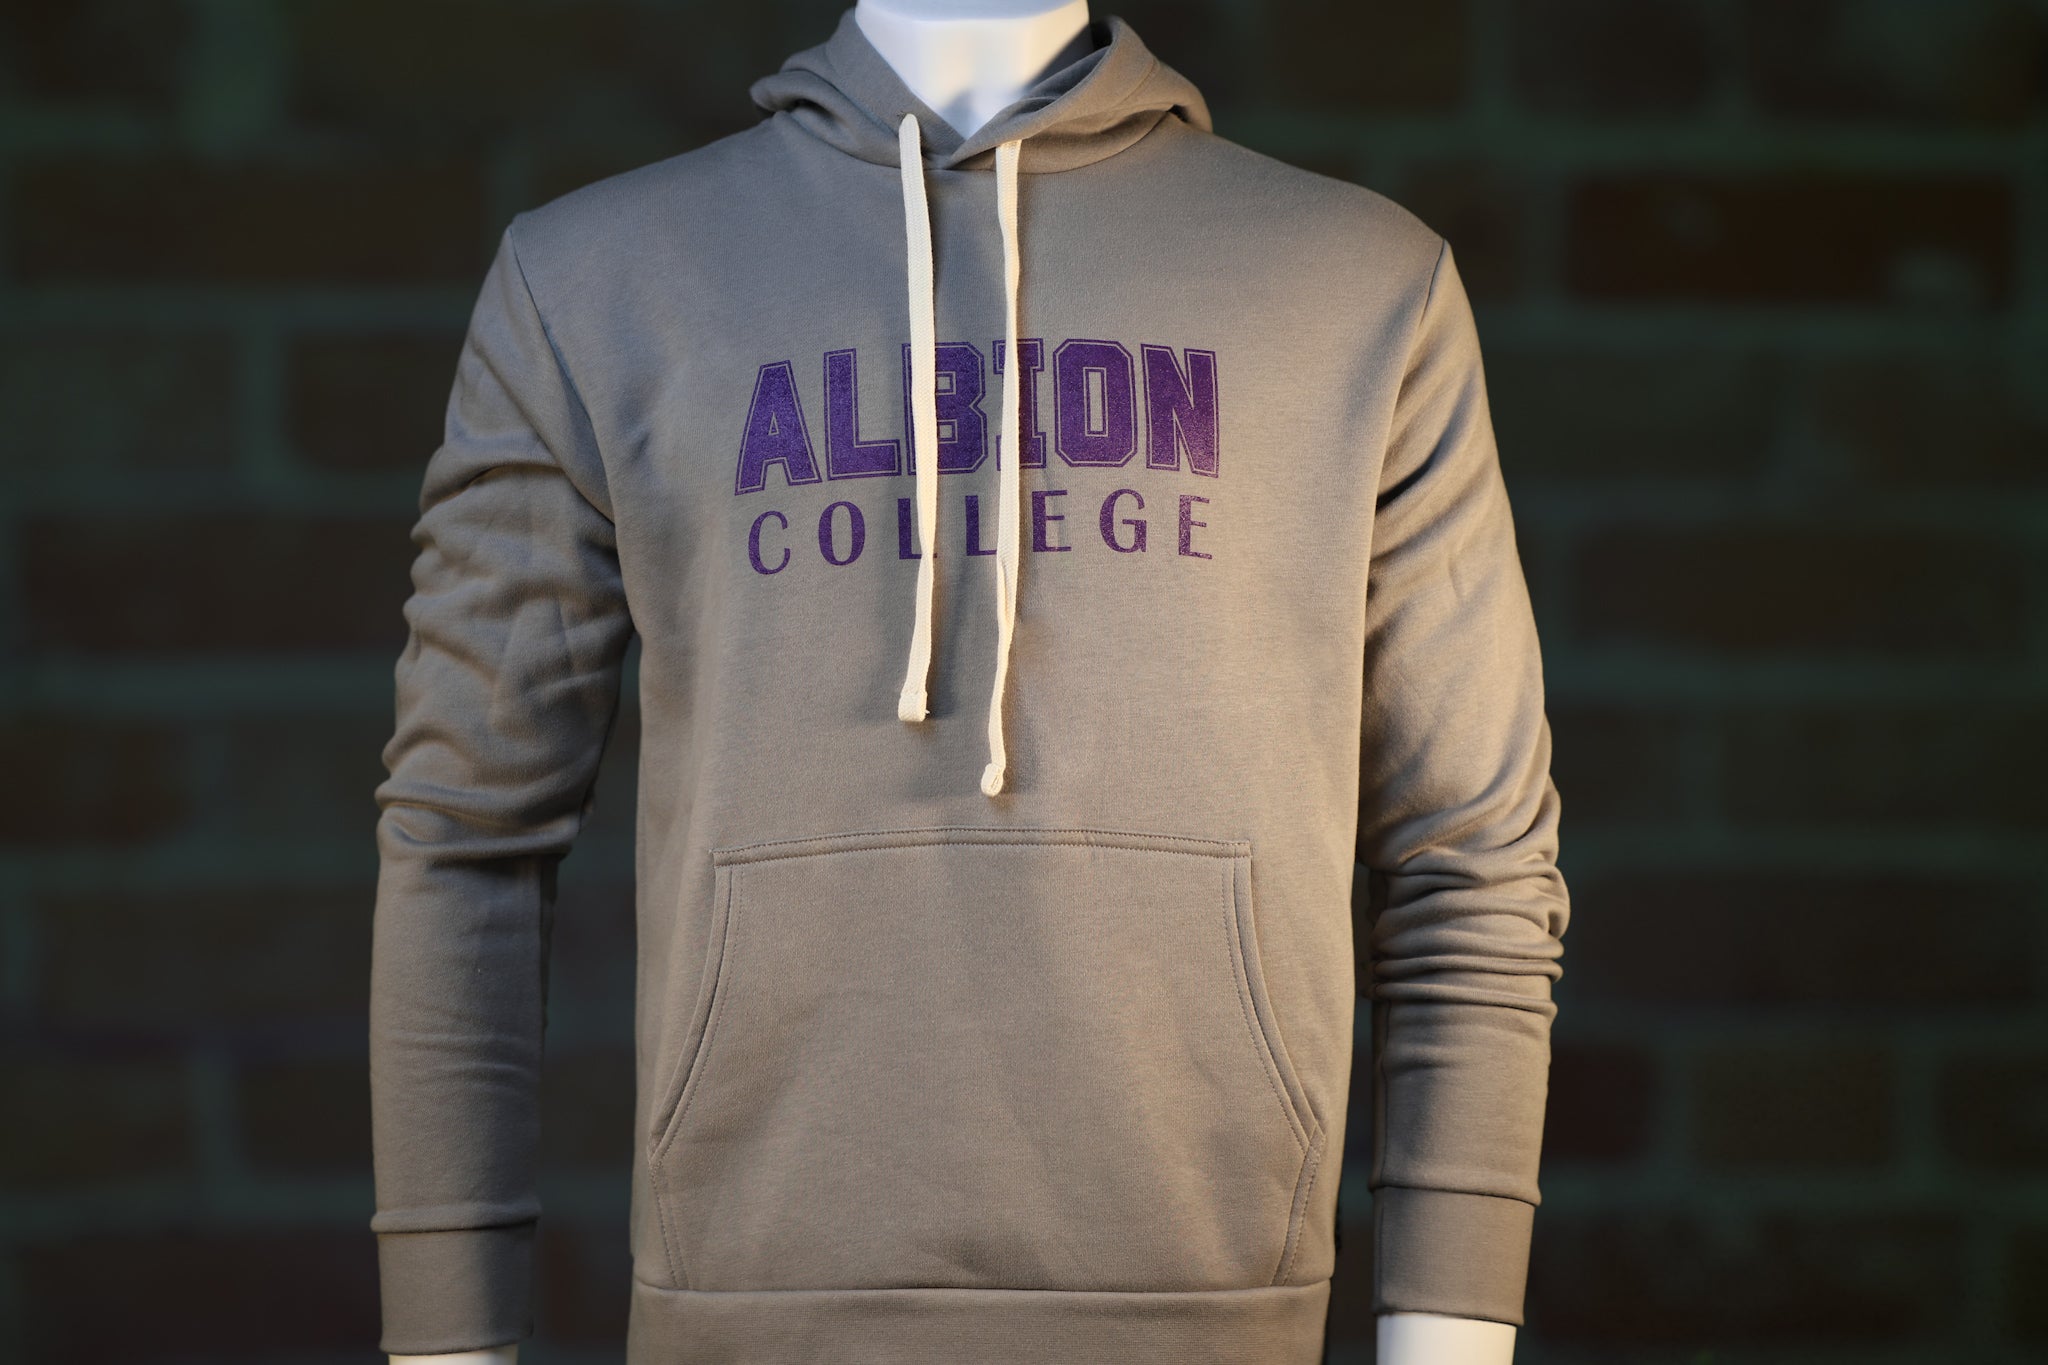 Classic Albion College Grey Hoodie